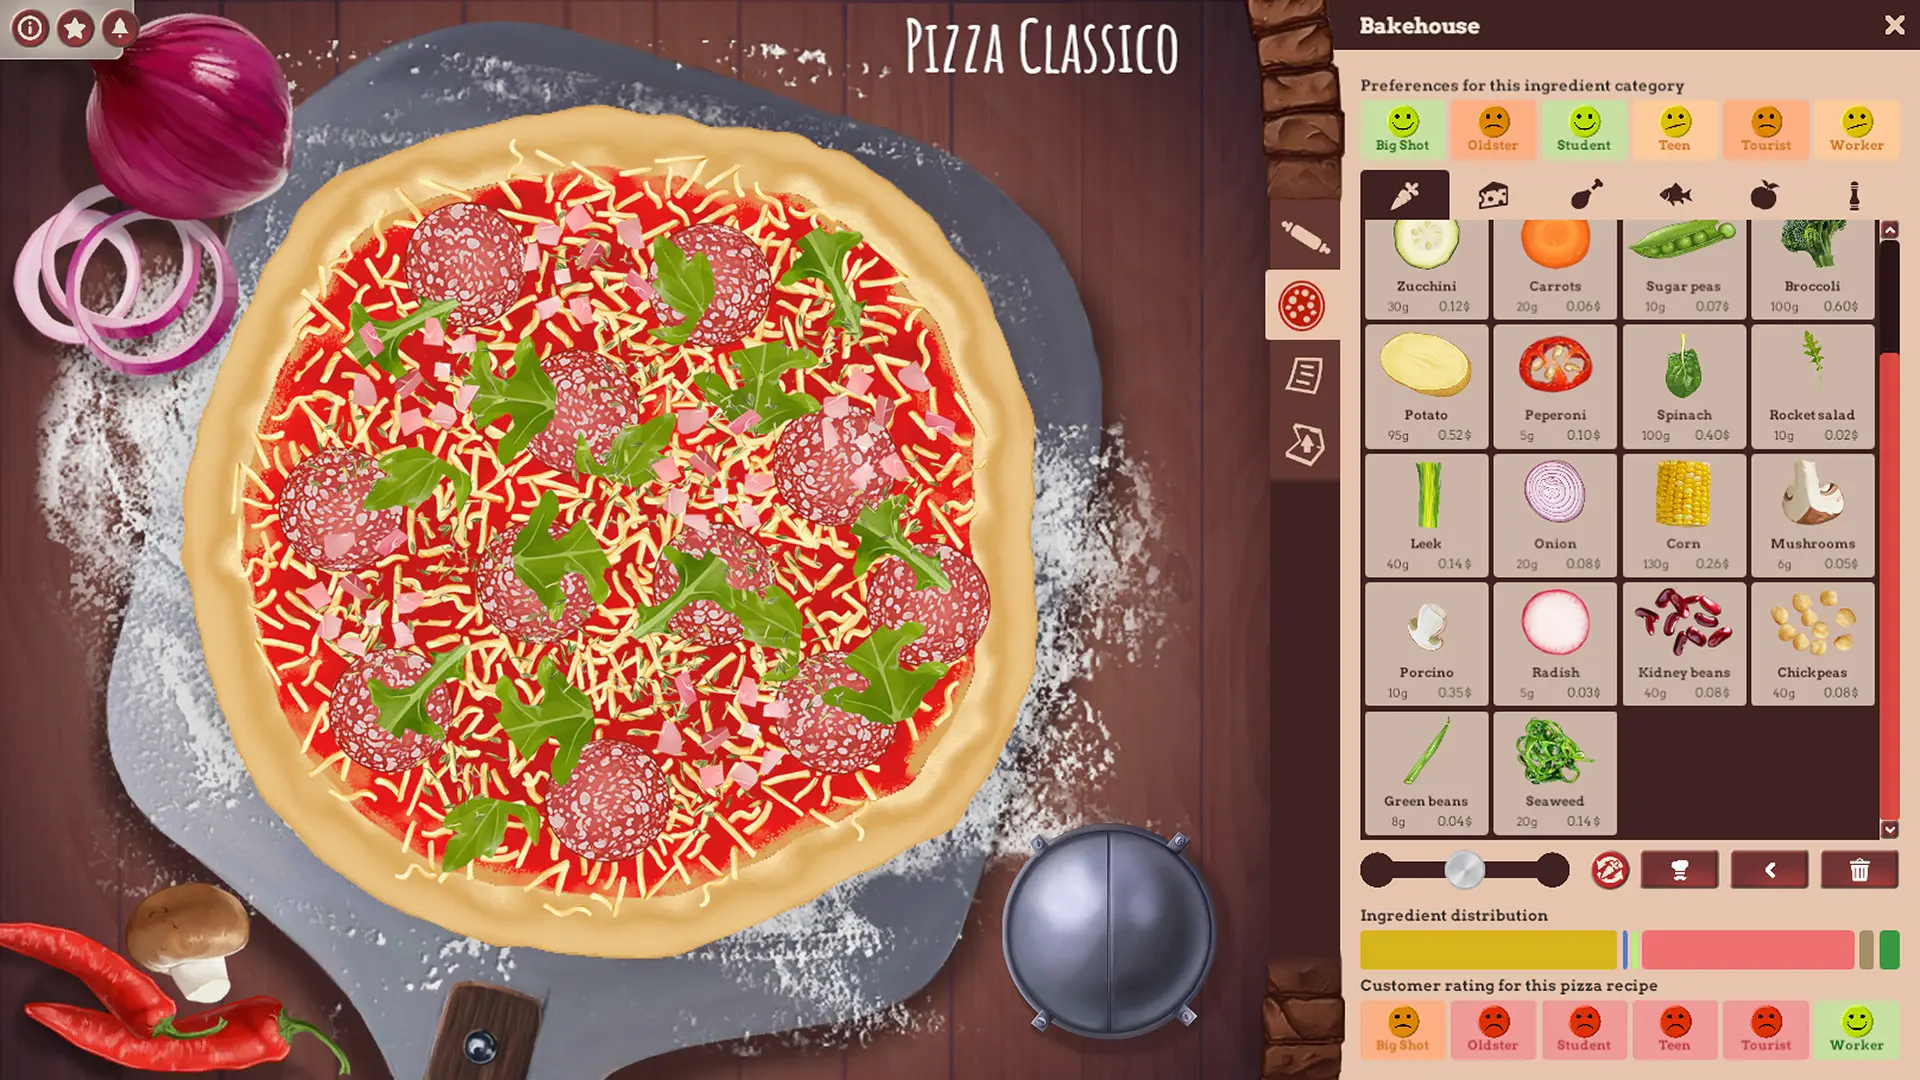 game making pizza - What is the pizza making game in the early 2000s